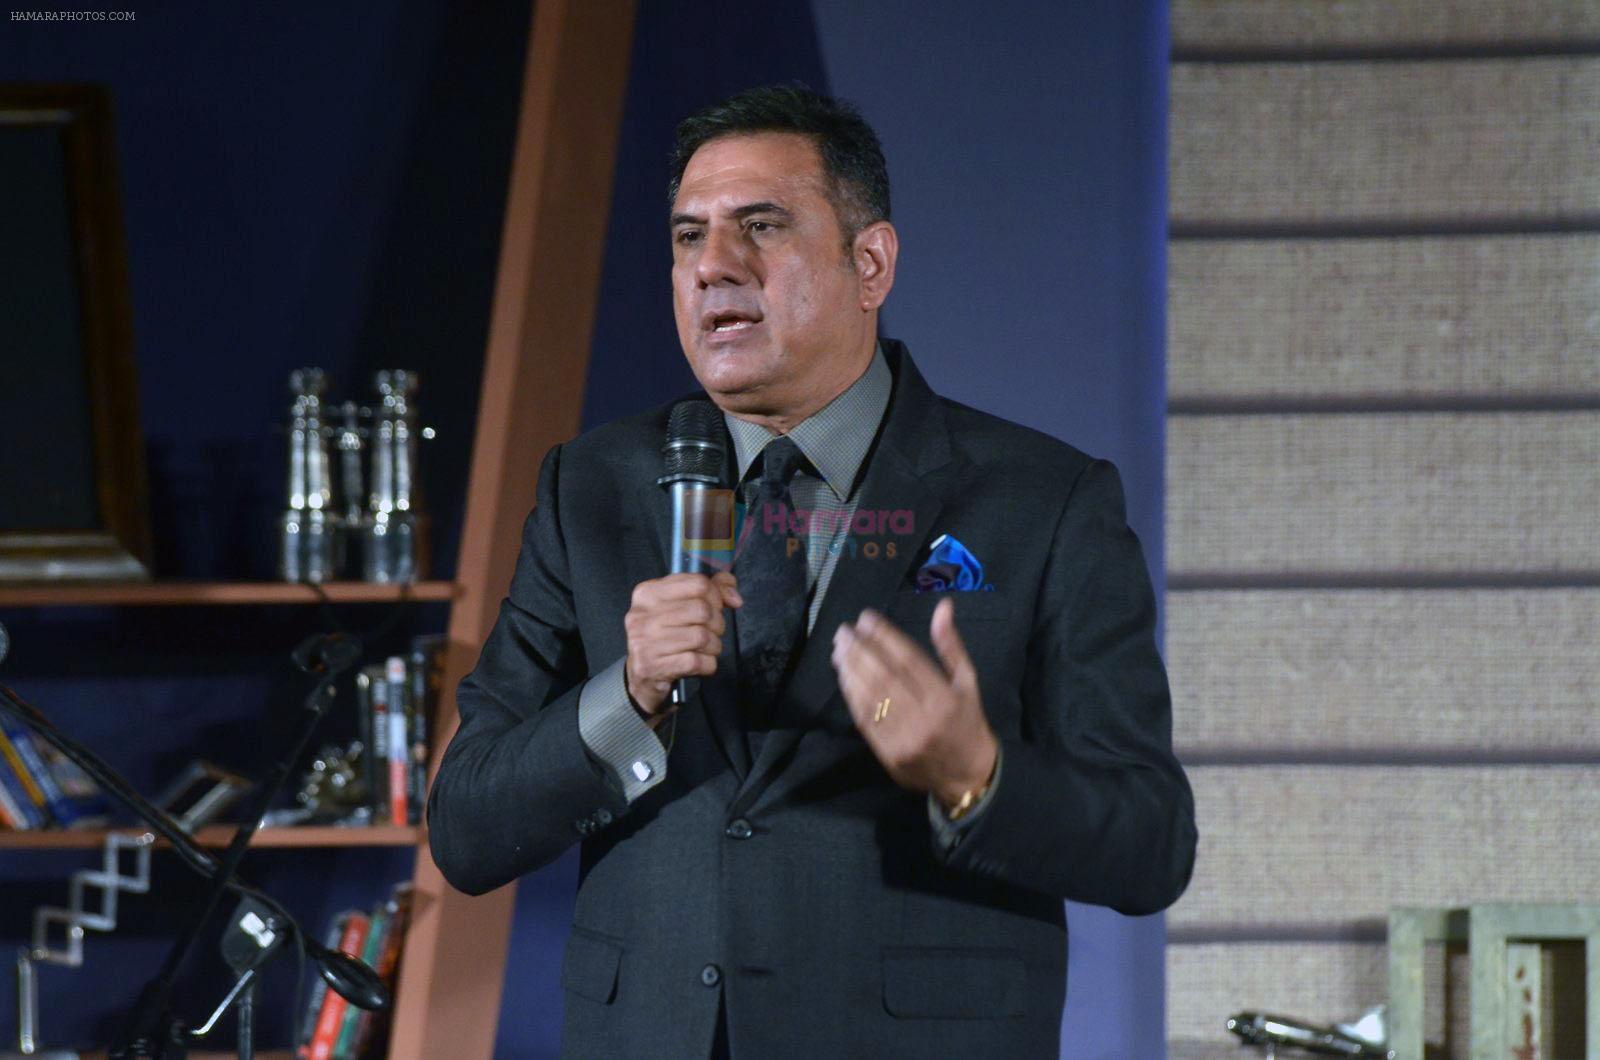 Bollywood actor Boman Irani speaks on style during the Blenders Pride Reserve Collection in Mumbai, India on June 18, 2016